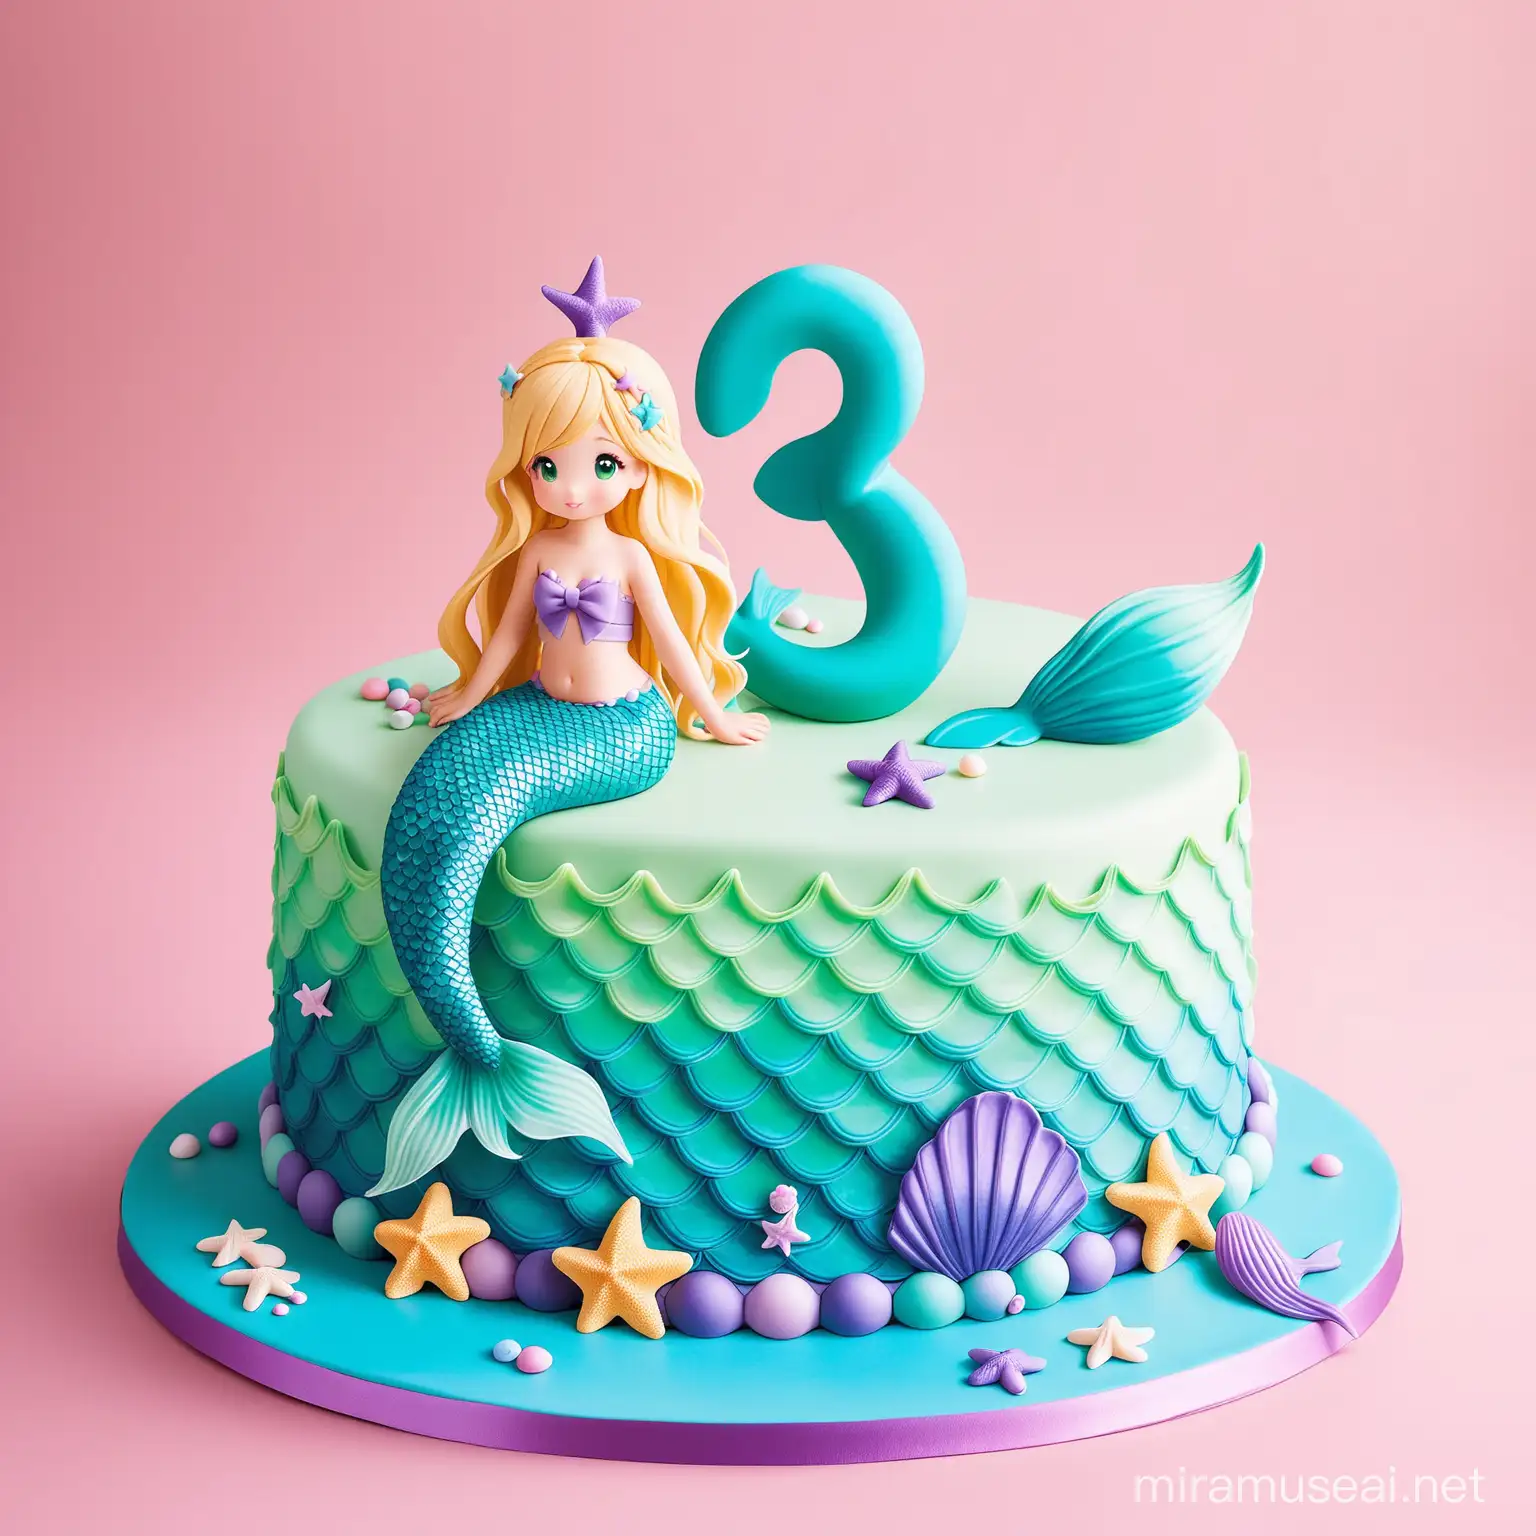 Mermaid Birthday Cake with Blonde Girl and Number 3